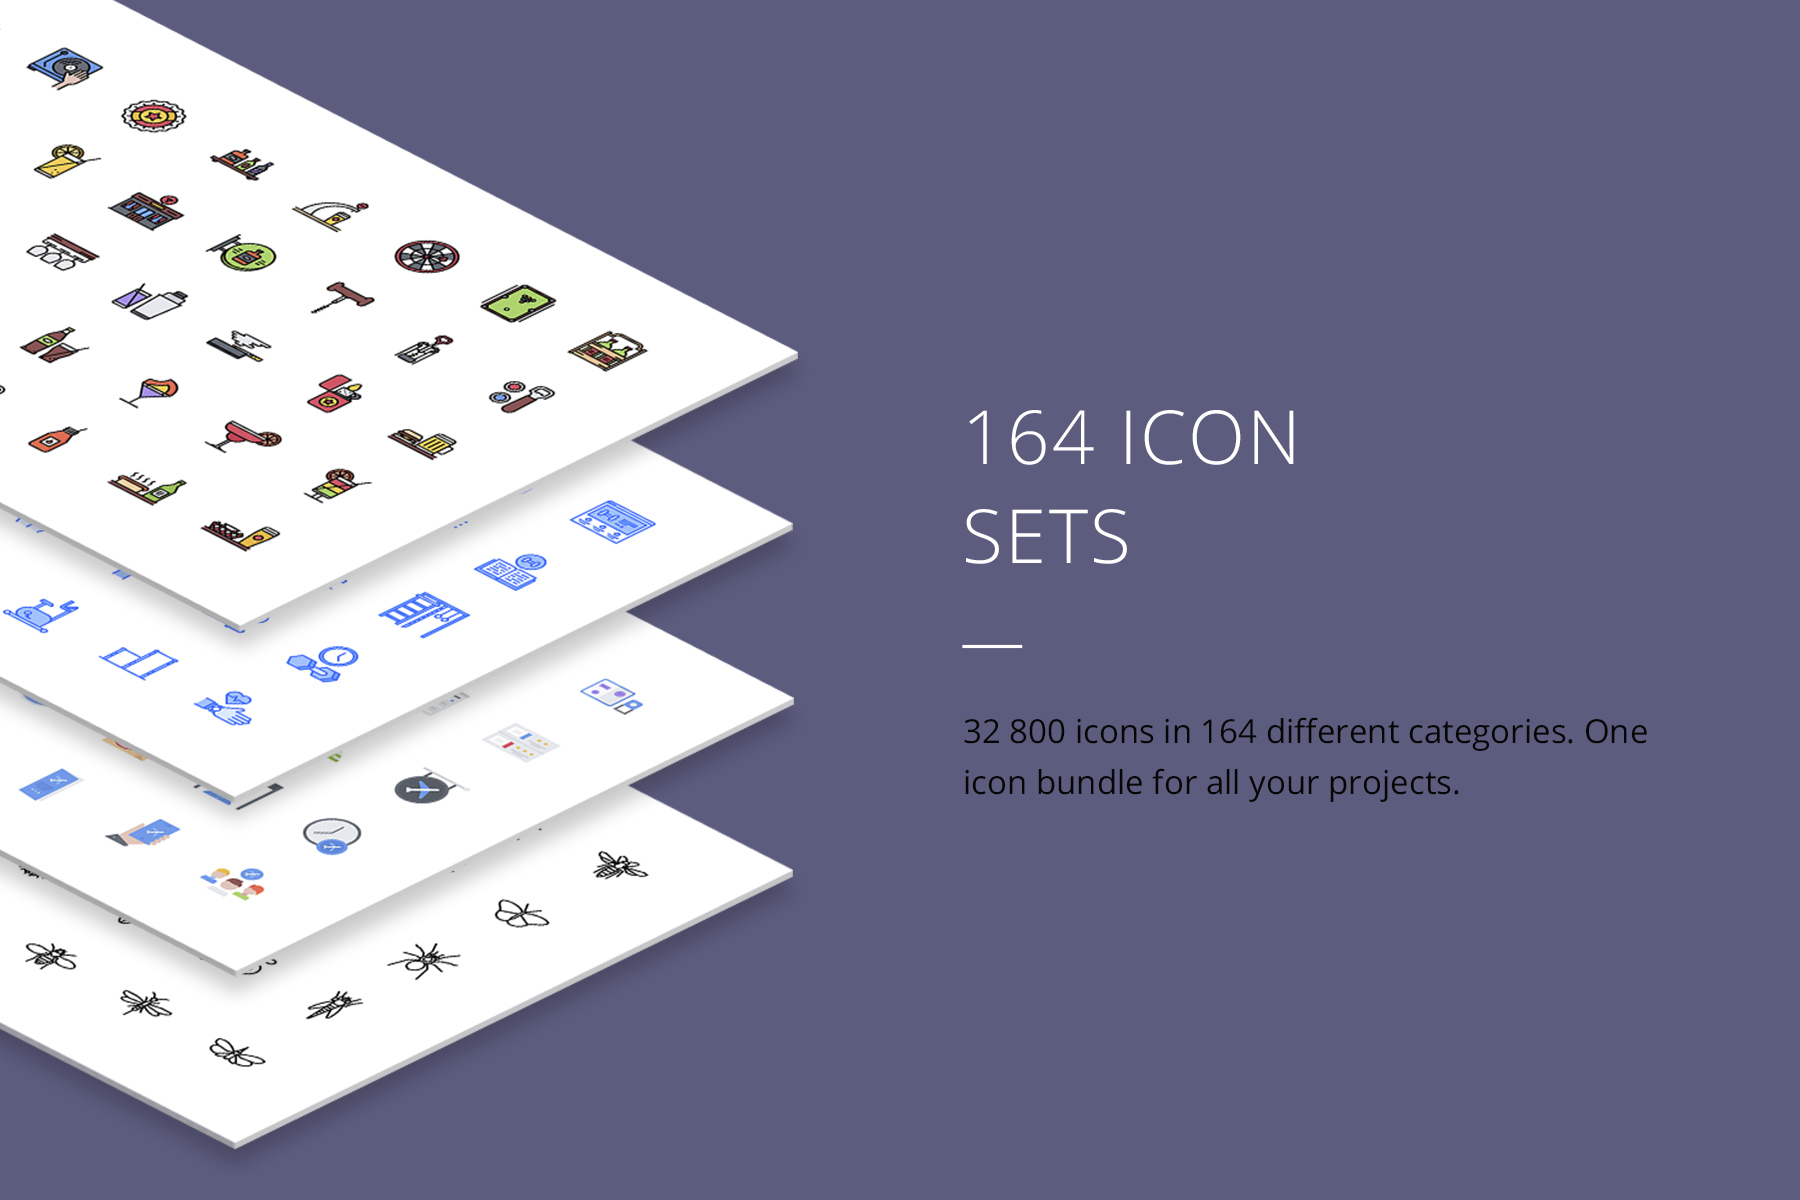 Collection includes more than 150 icons.